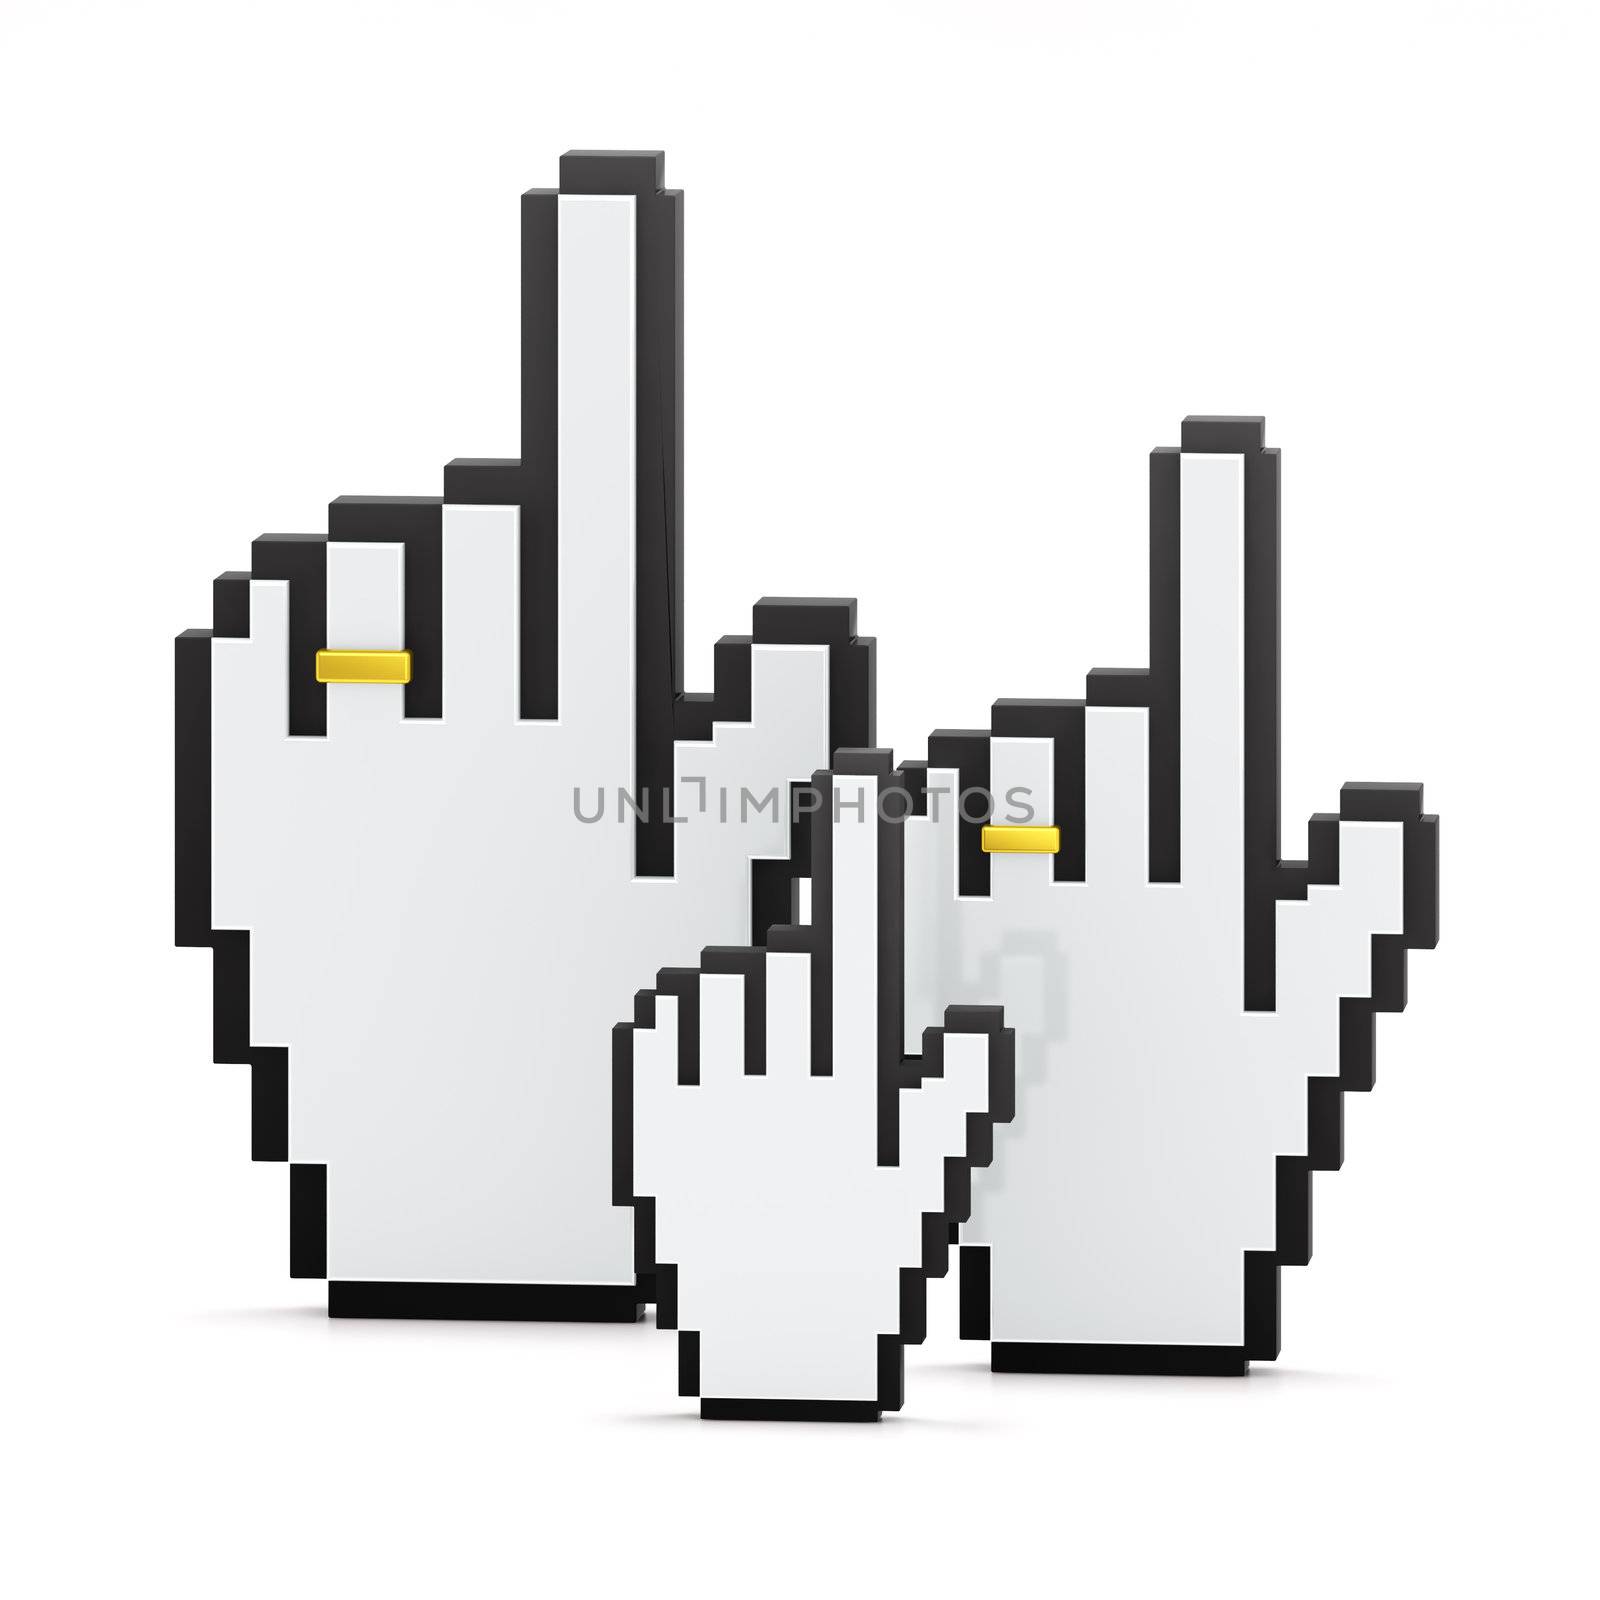 E-family concept: two large cursors with wedding rings on fingers, and small one